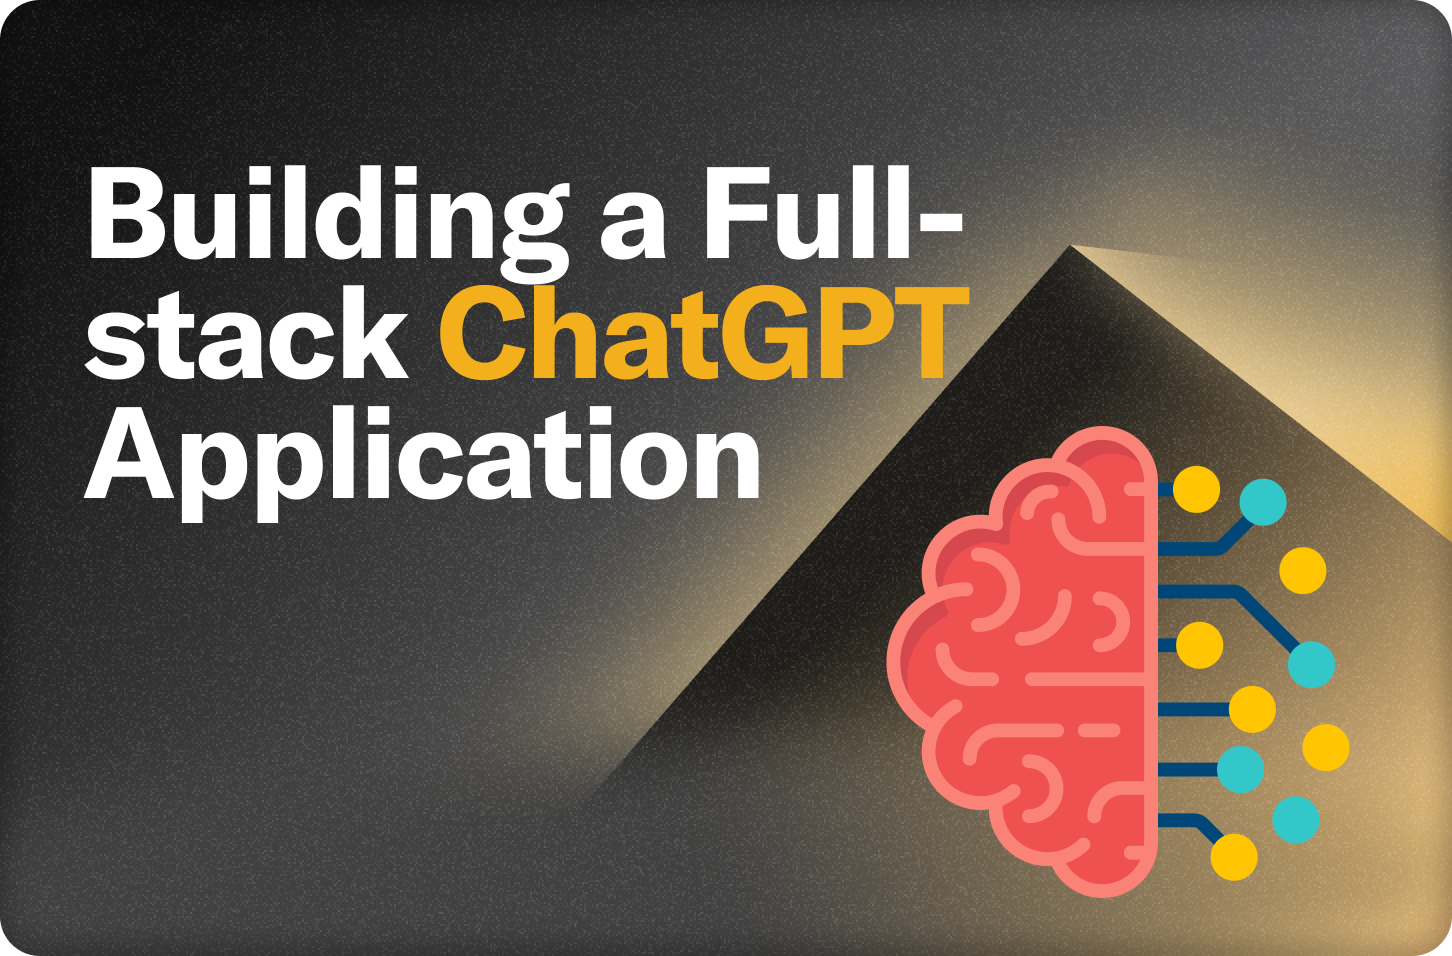 Building a fullstack chat-gpt application